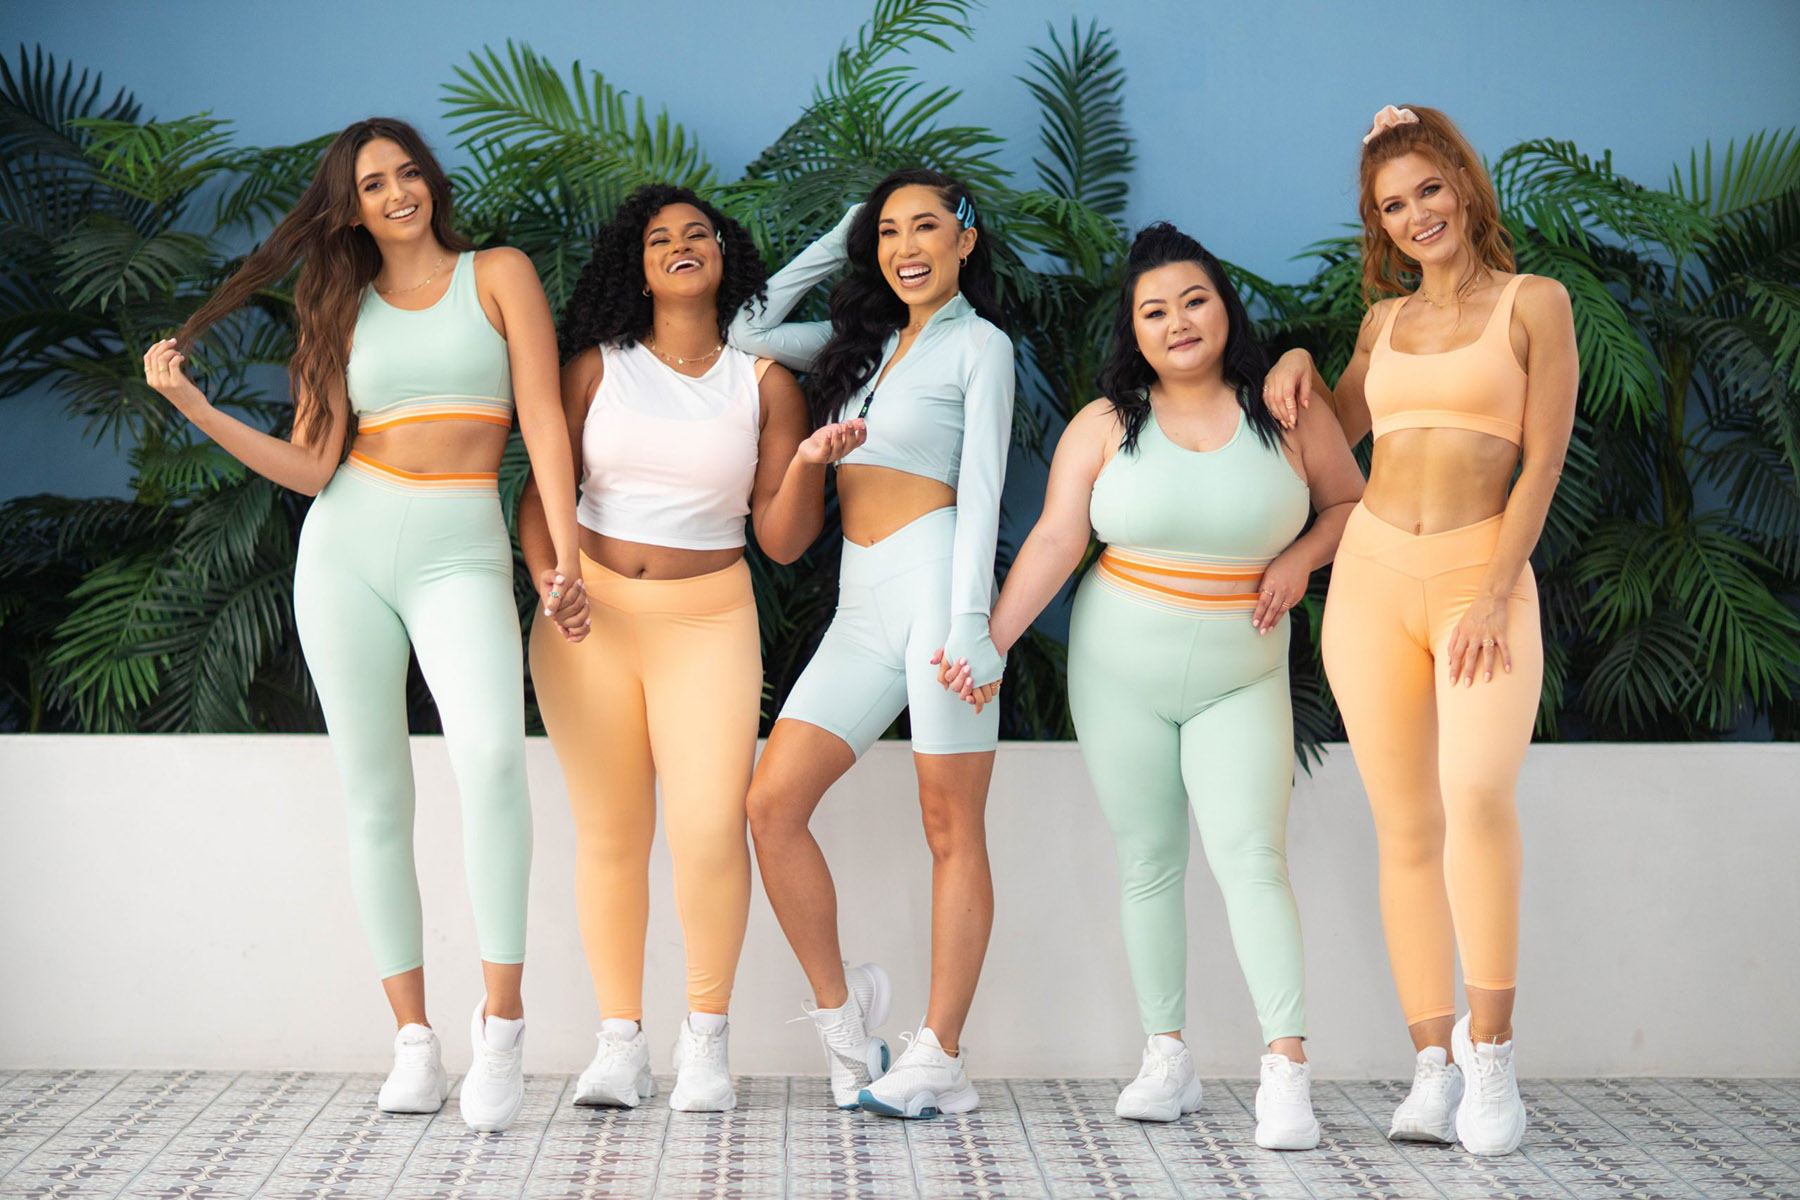 8 Fitness Influencers On Youtube To Help You Workoutfromhome